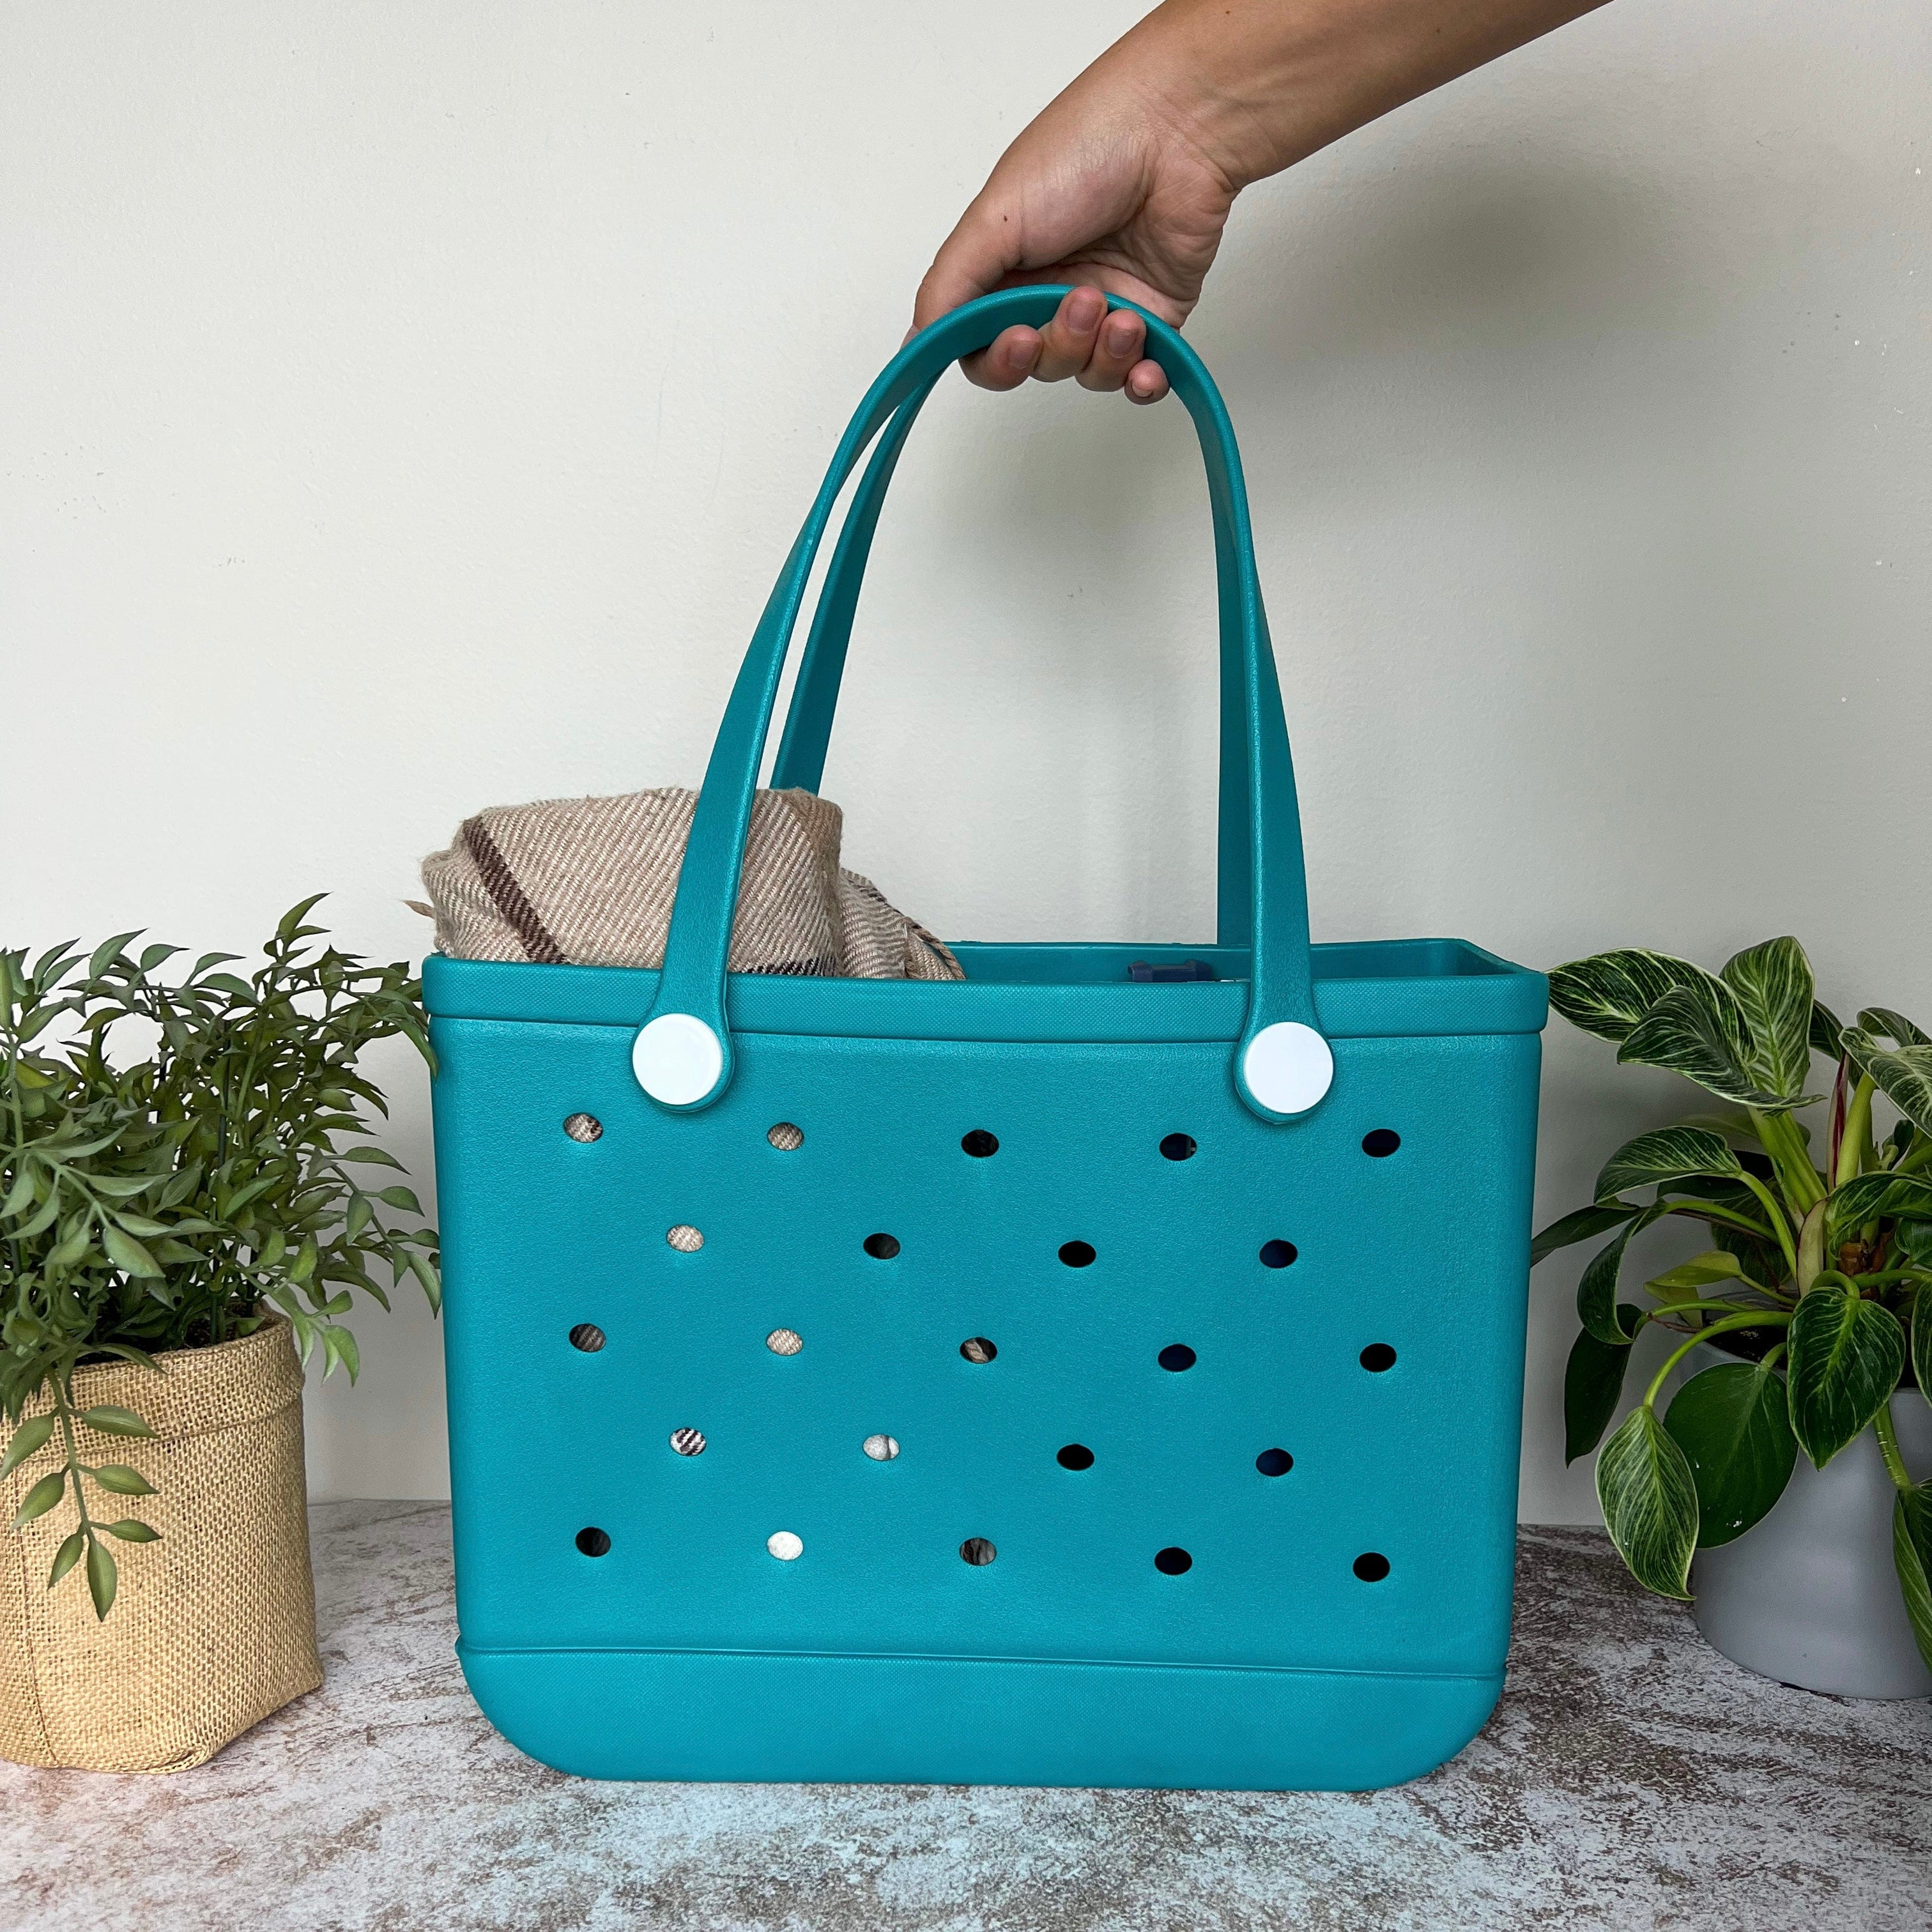 Bogg bag Turquoise & Caicos bogg™ bag, Best Price and Reviews